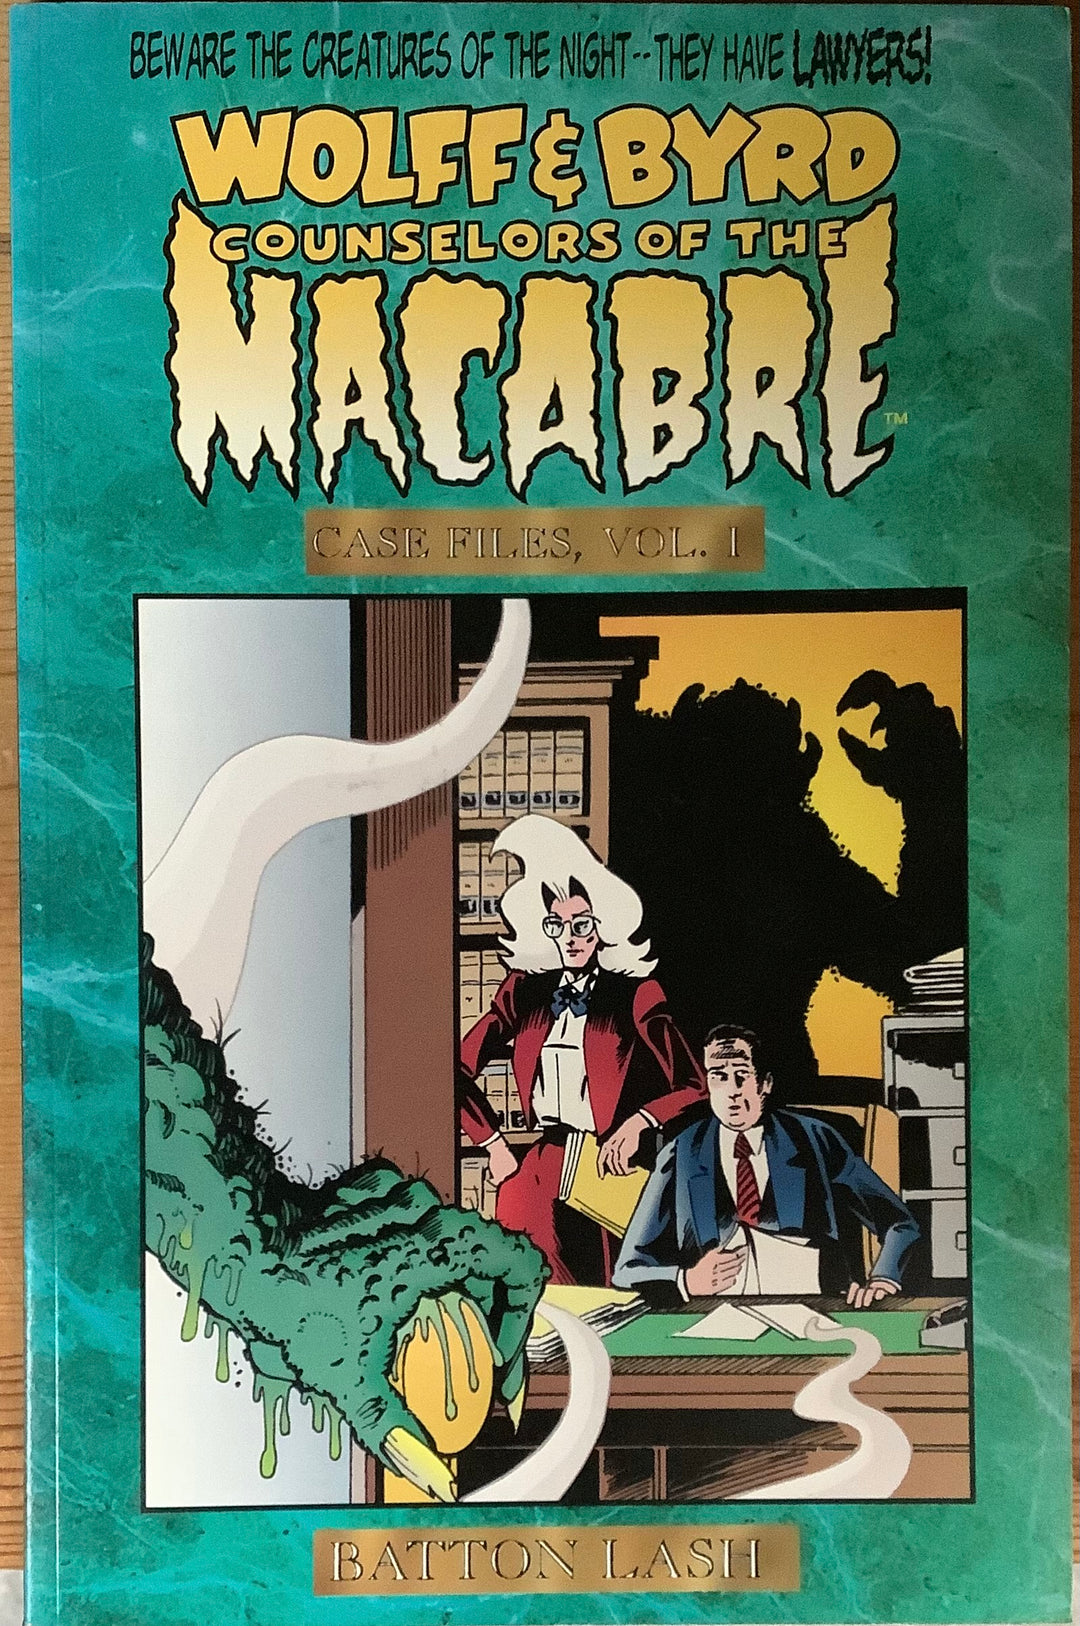 Wolff & Byrd Counselors of the Macabre - Case Files Vol #1 Graphic Novel OXS-11